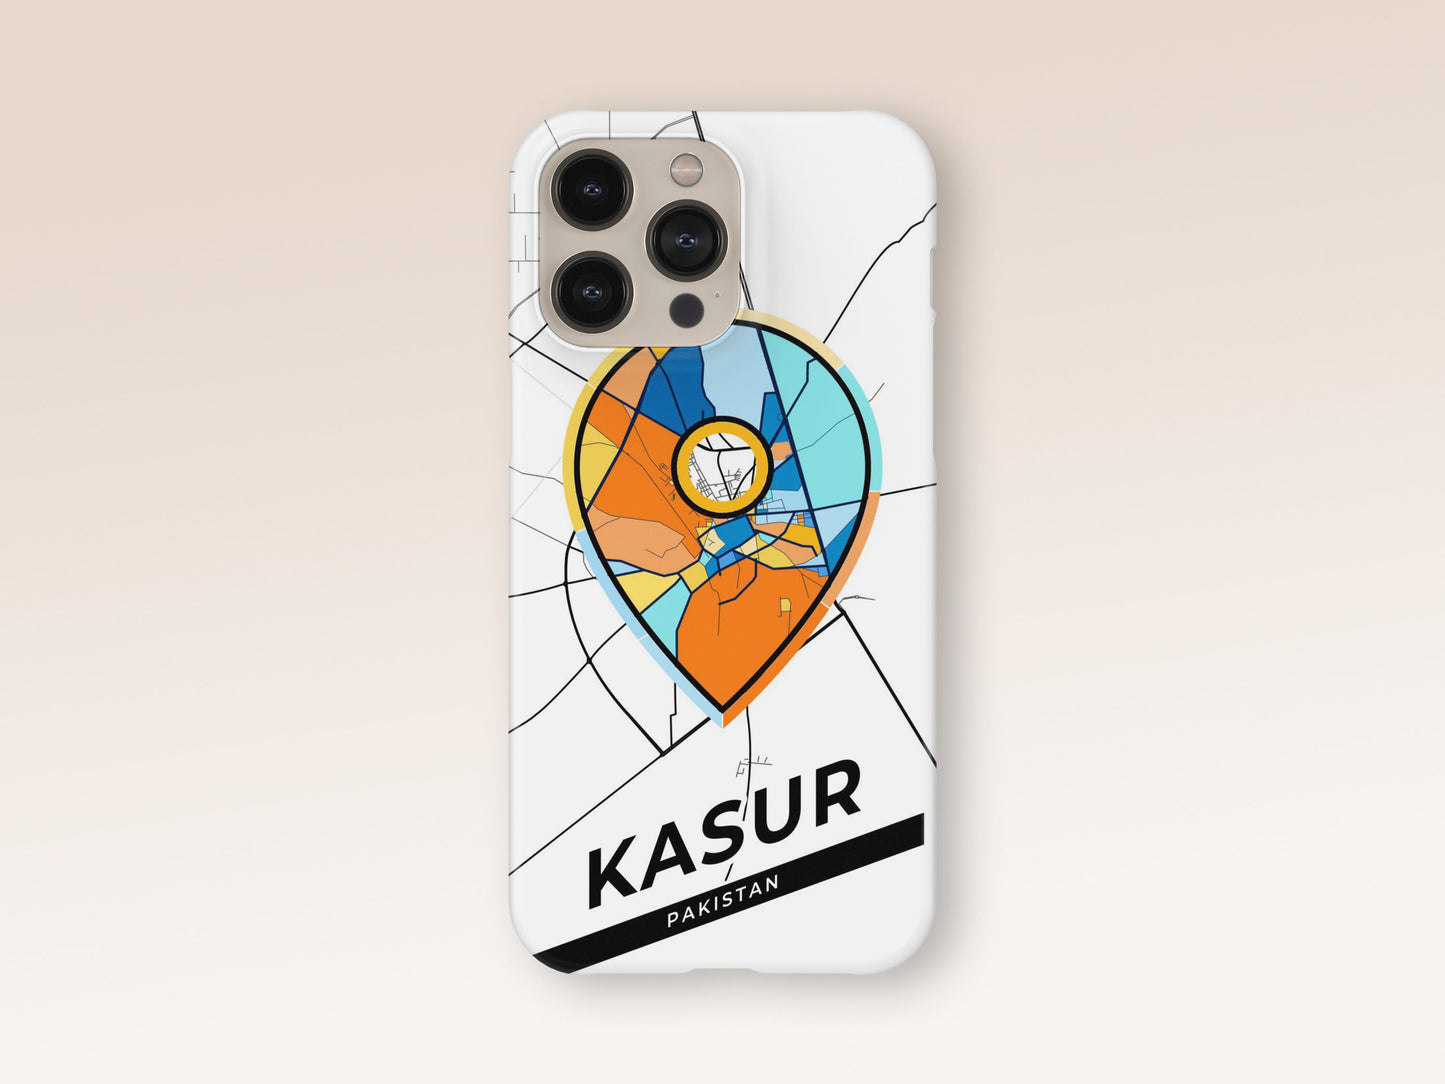 Kasur Pakistan slim phone case with colorful icon. Birthday, wedding or housewarming gift. Couple match cases. 1